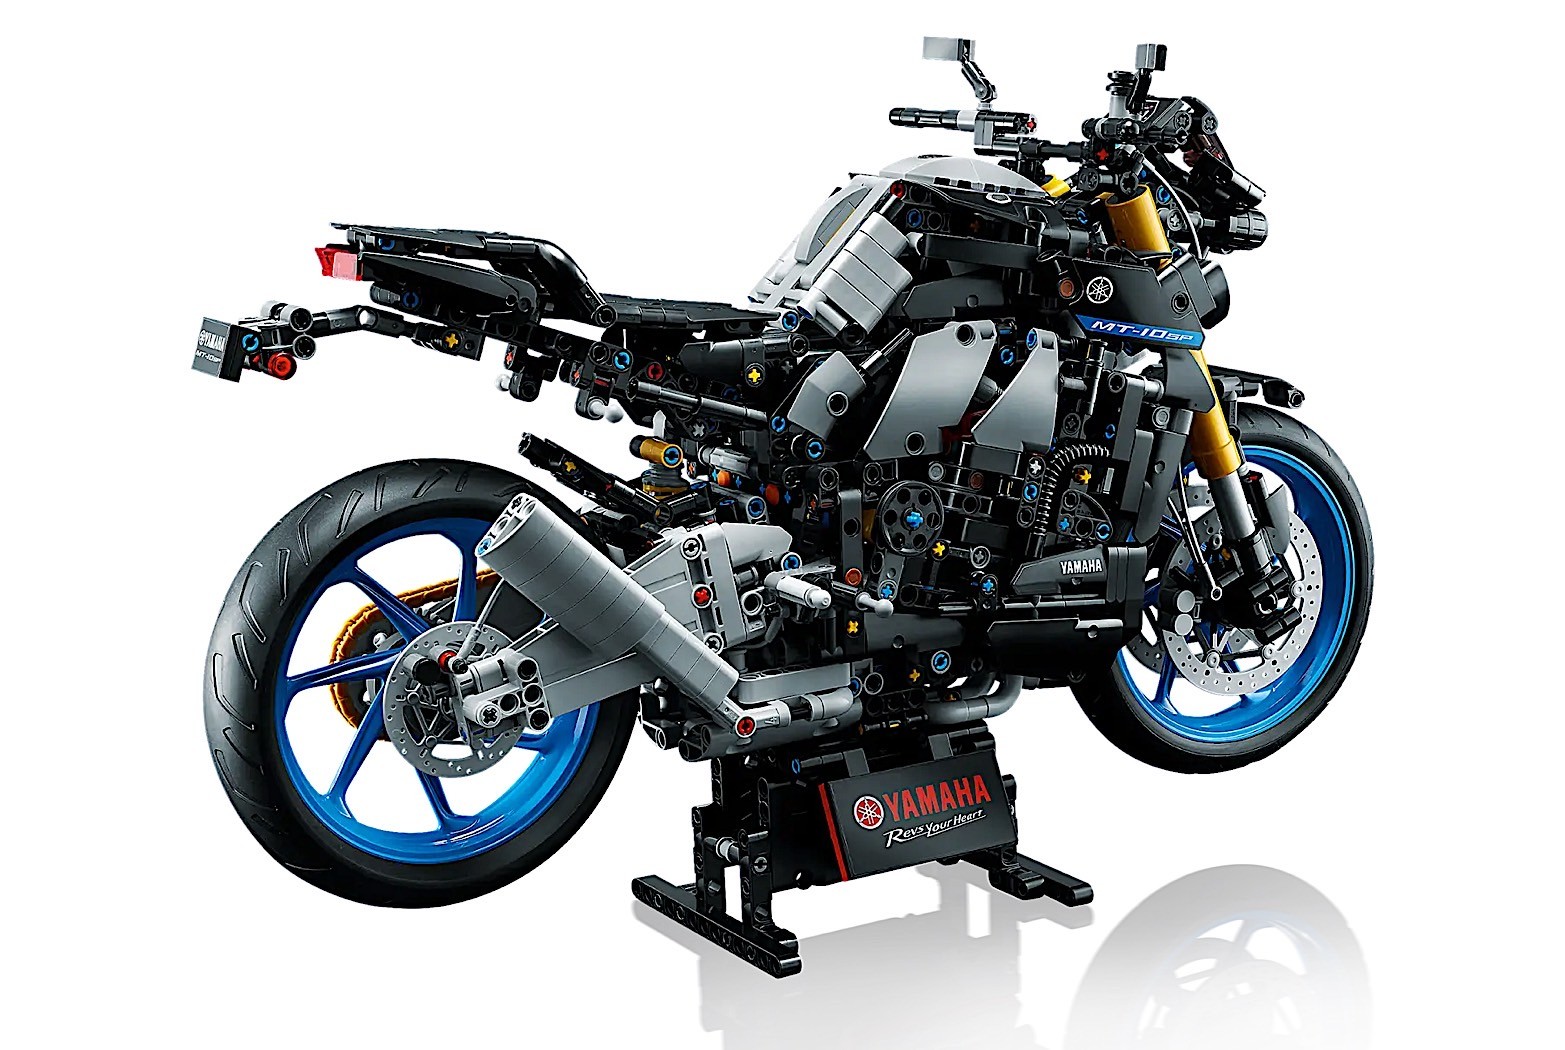 yamaha mt 10 sp comes together from 1478 lego pieces just as aggressive as the real deal 3